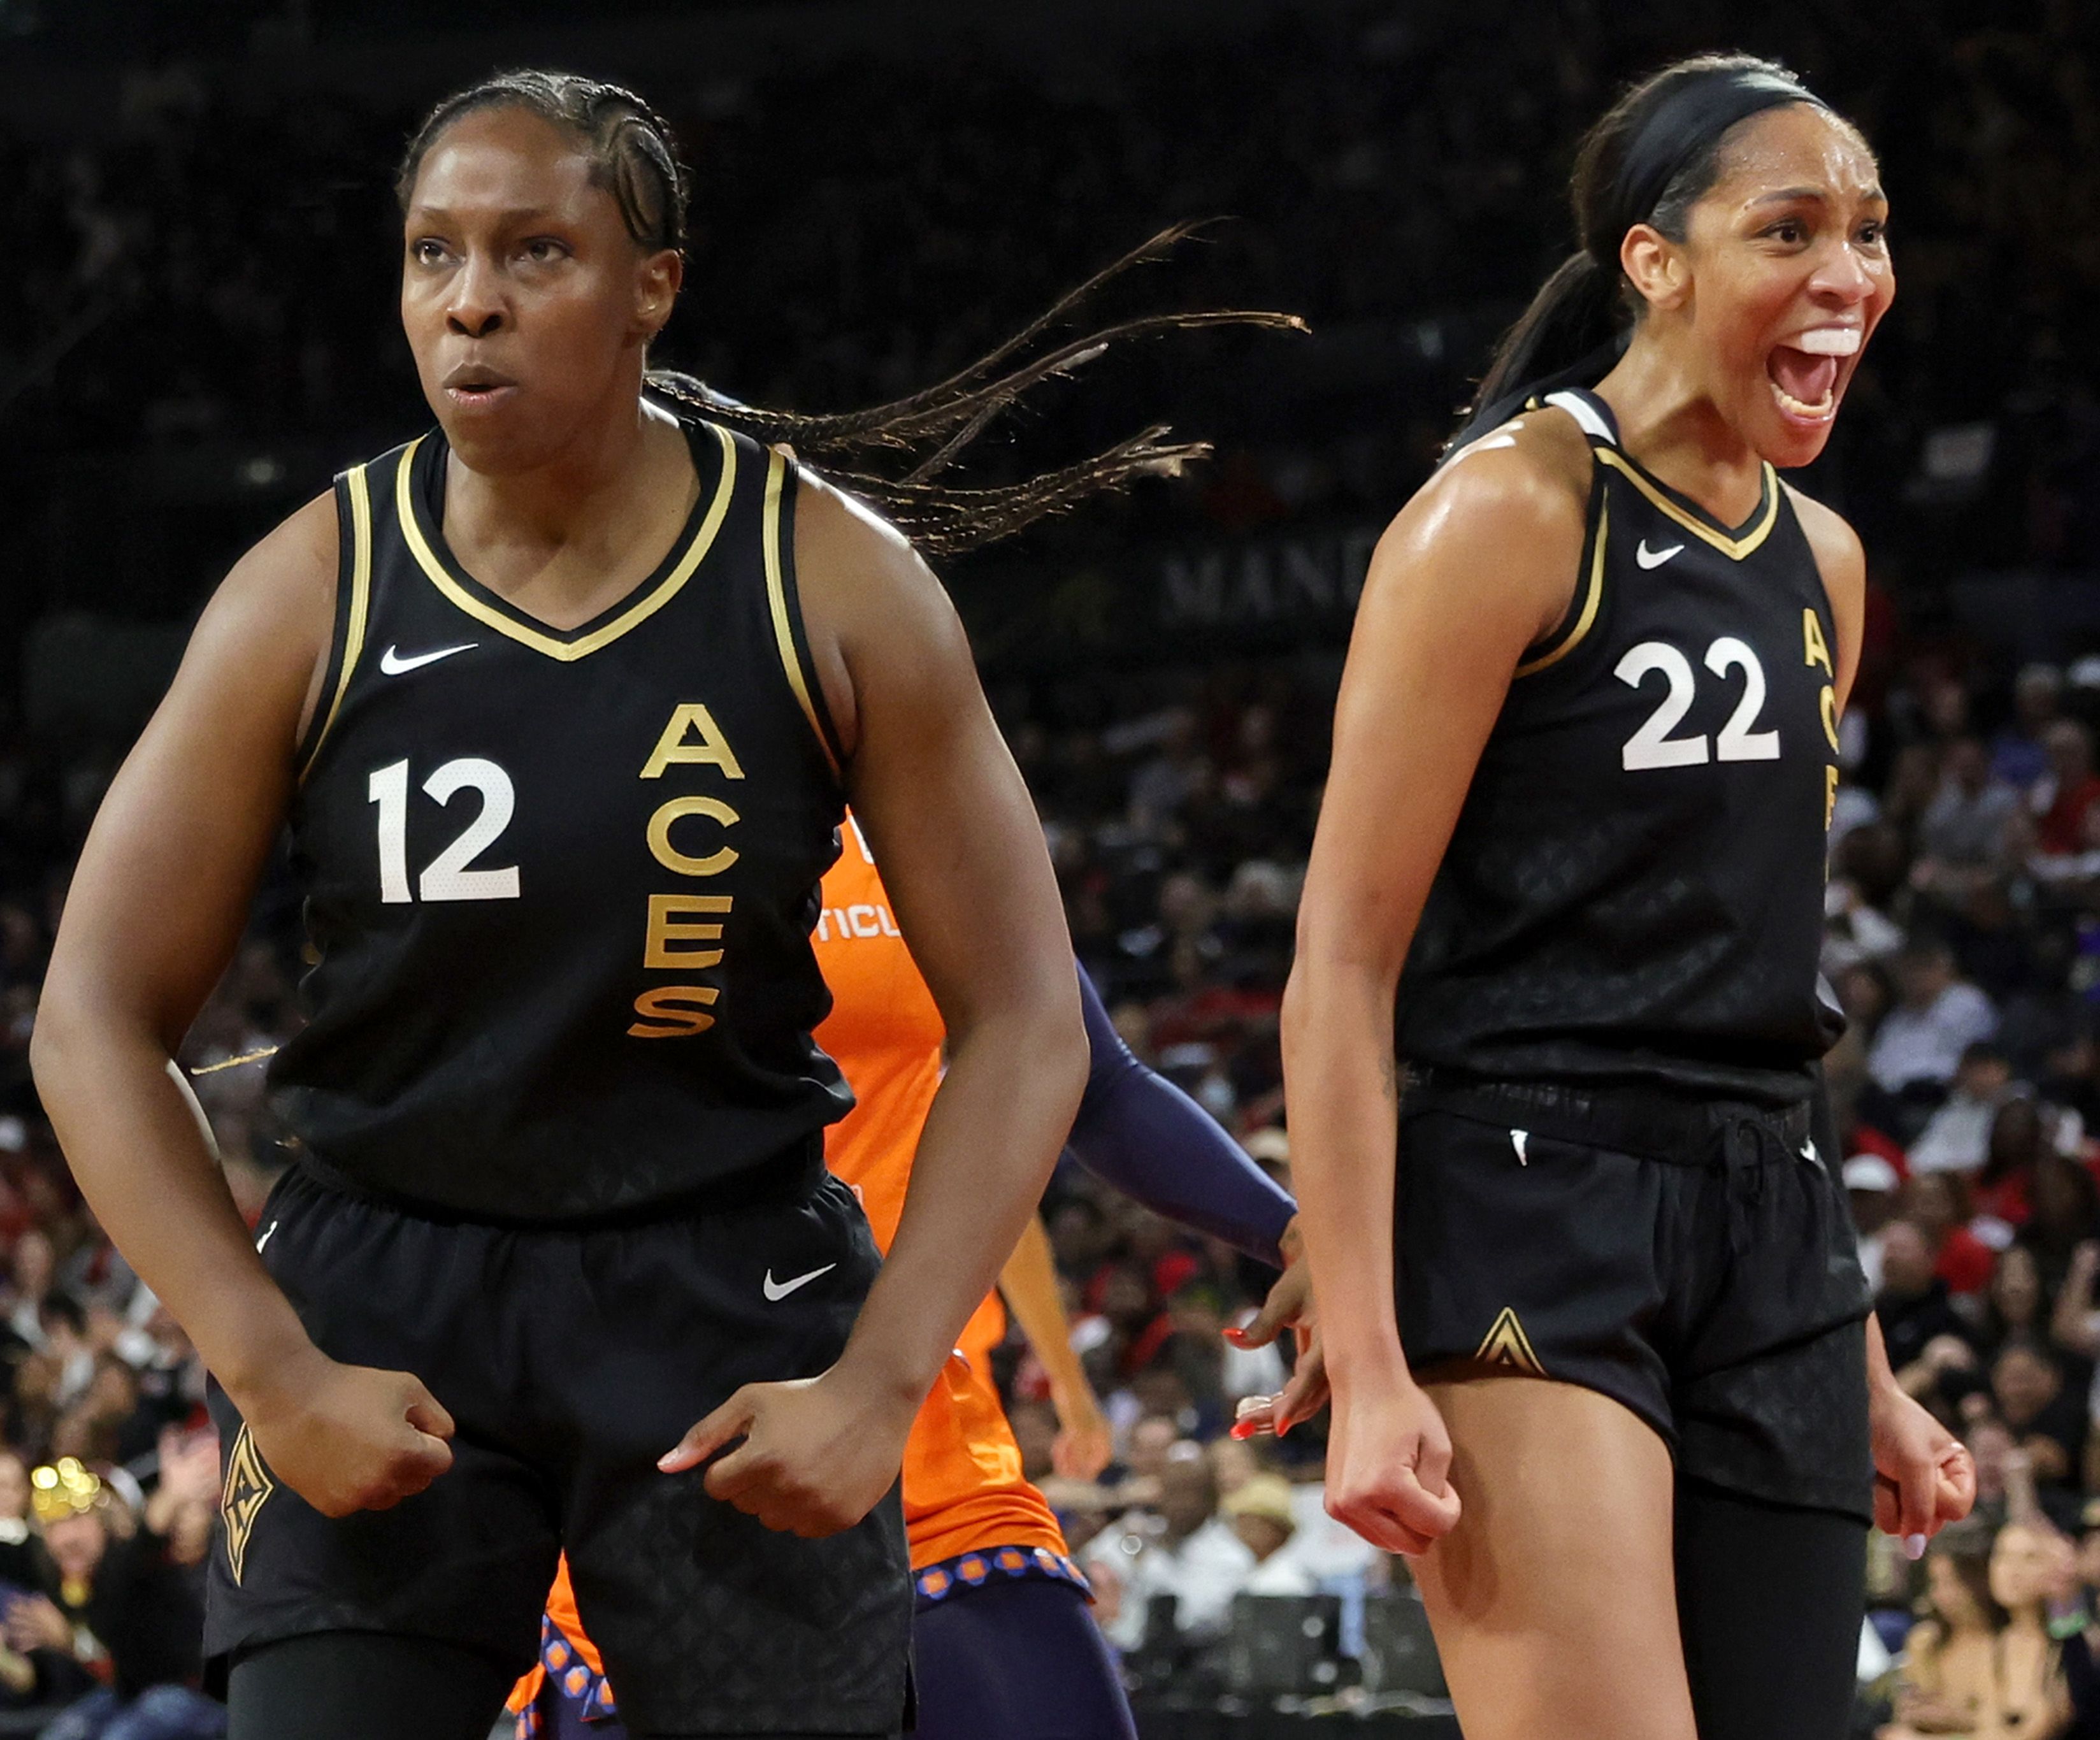 Going back to back? The @lvaces liked their odds. ♠️♠️ Congrats on  delivering Las Vegas its second WNBA championship in two seasons!